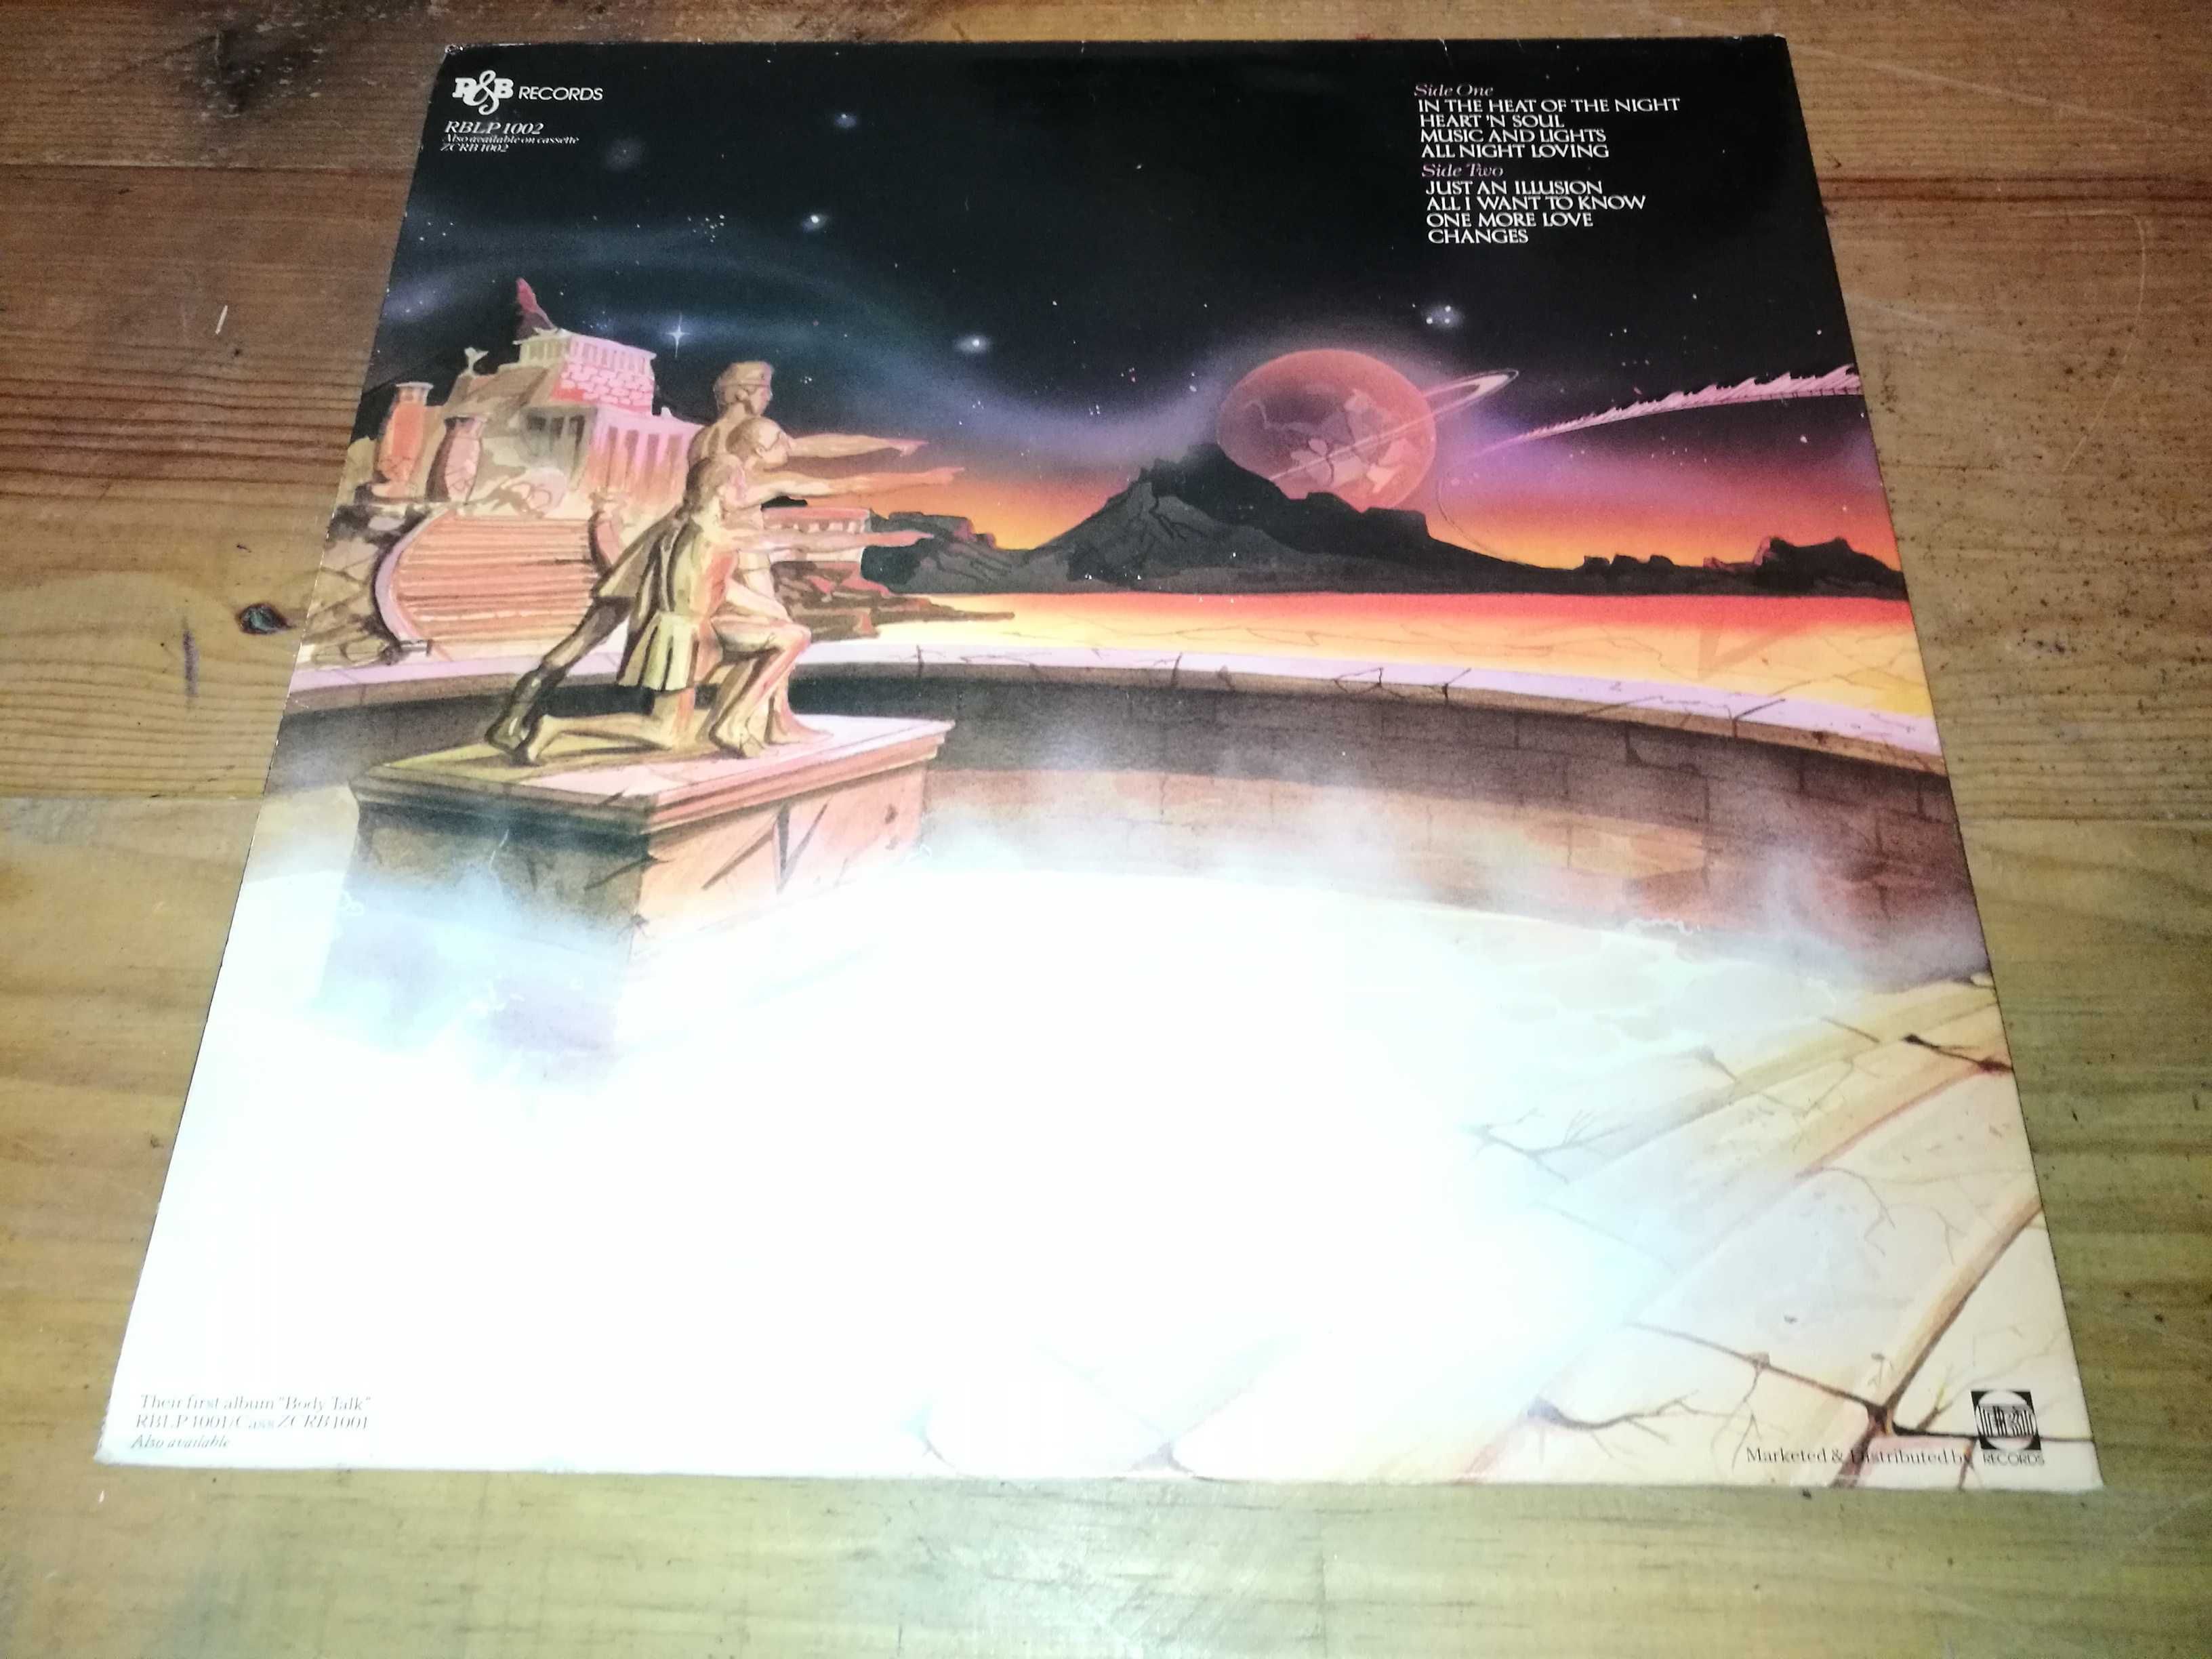 Imagination  - In The Heat Of The Night  LP